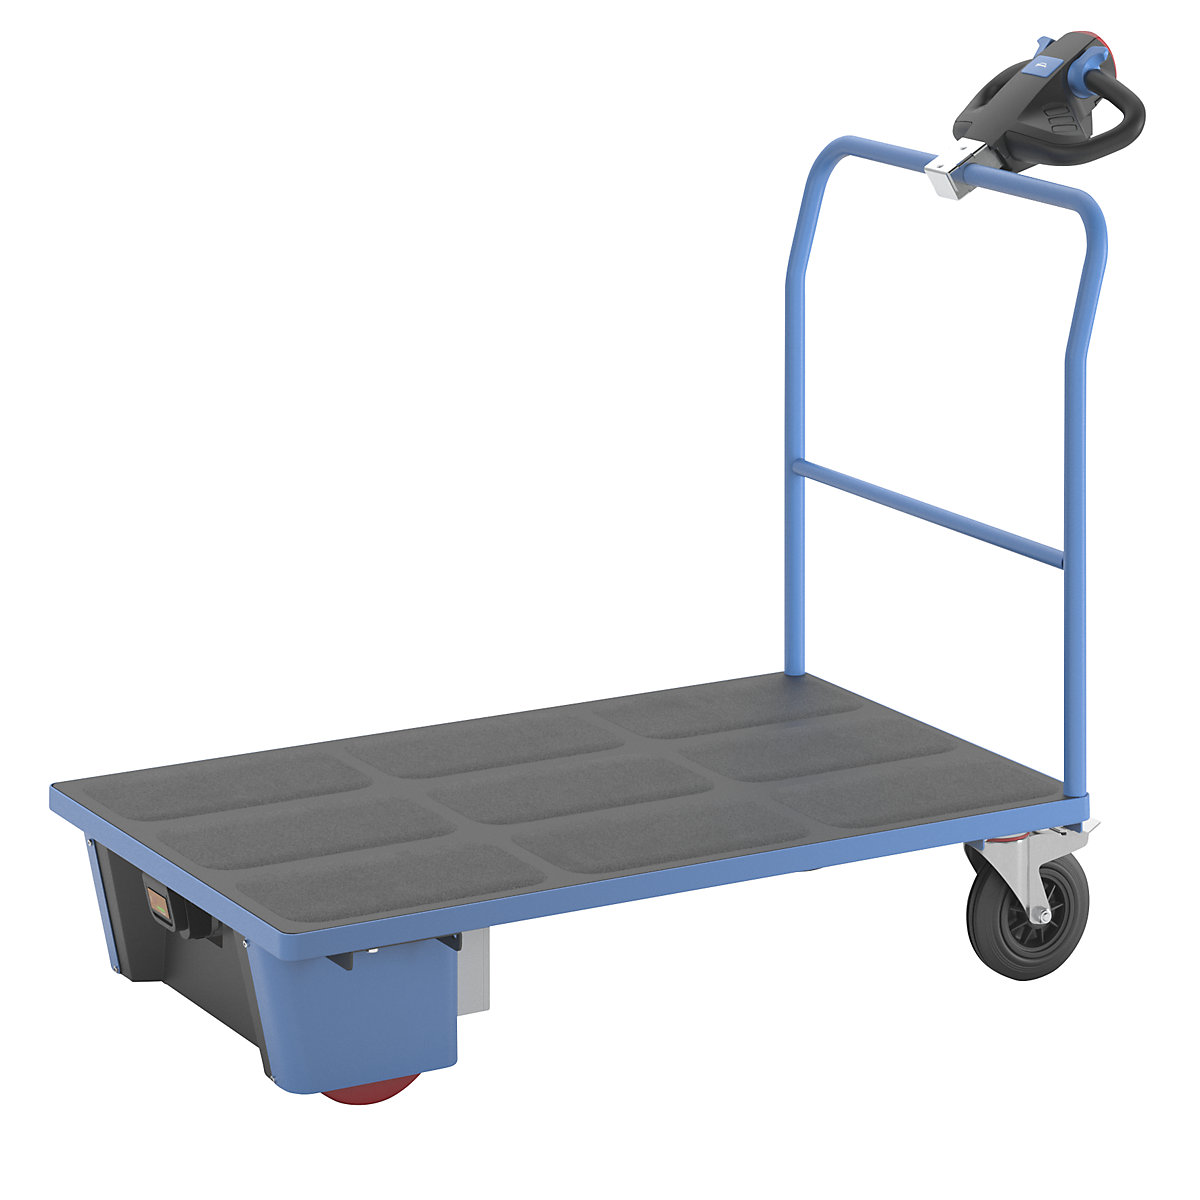 Platform truck with electric drive – eurokraft pro, tubular push handle, LxWxH 1570 x 800 x 1300 mm, solid rubber tyres-13